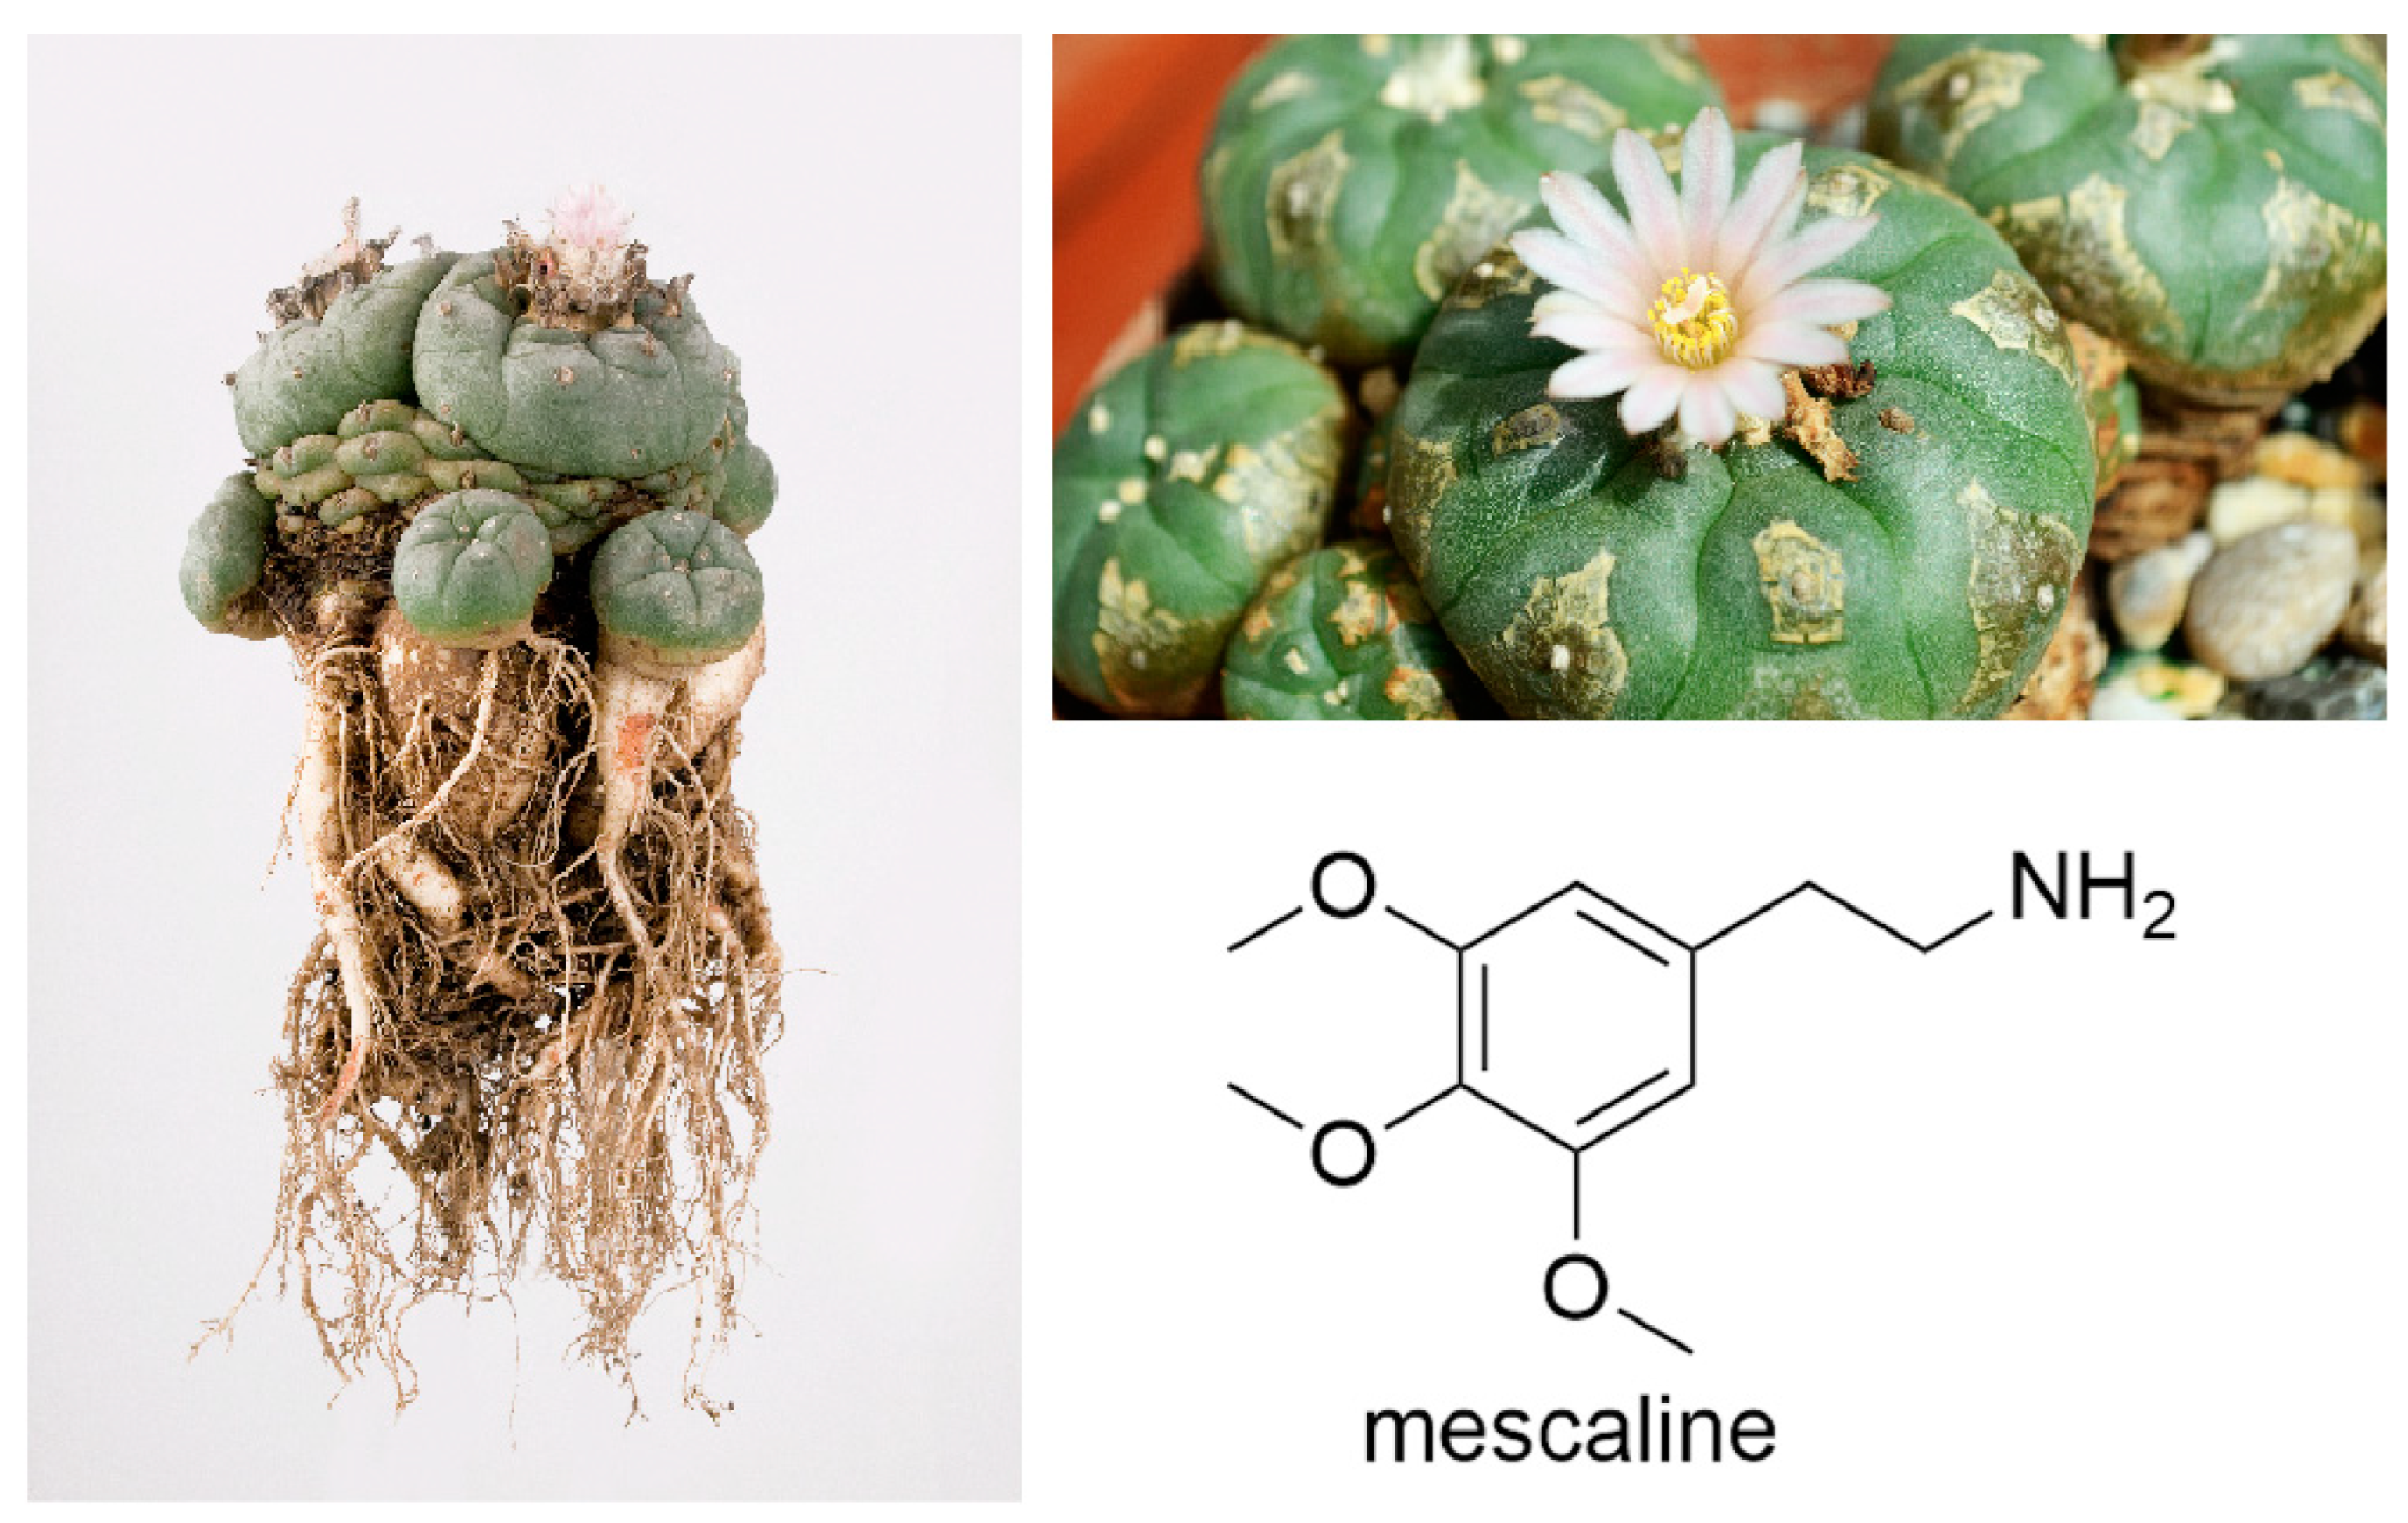 Molecules | Free Full-Text | An Overview on the Hallucinogenic Peyote and  Its Alkaloid Mescaline: The Importance of Context, Ceremony and Culture